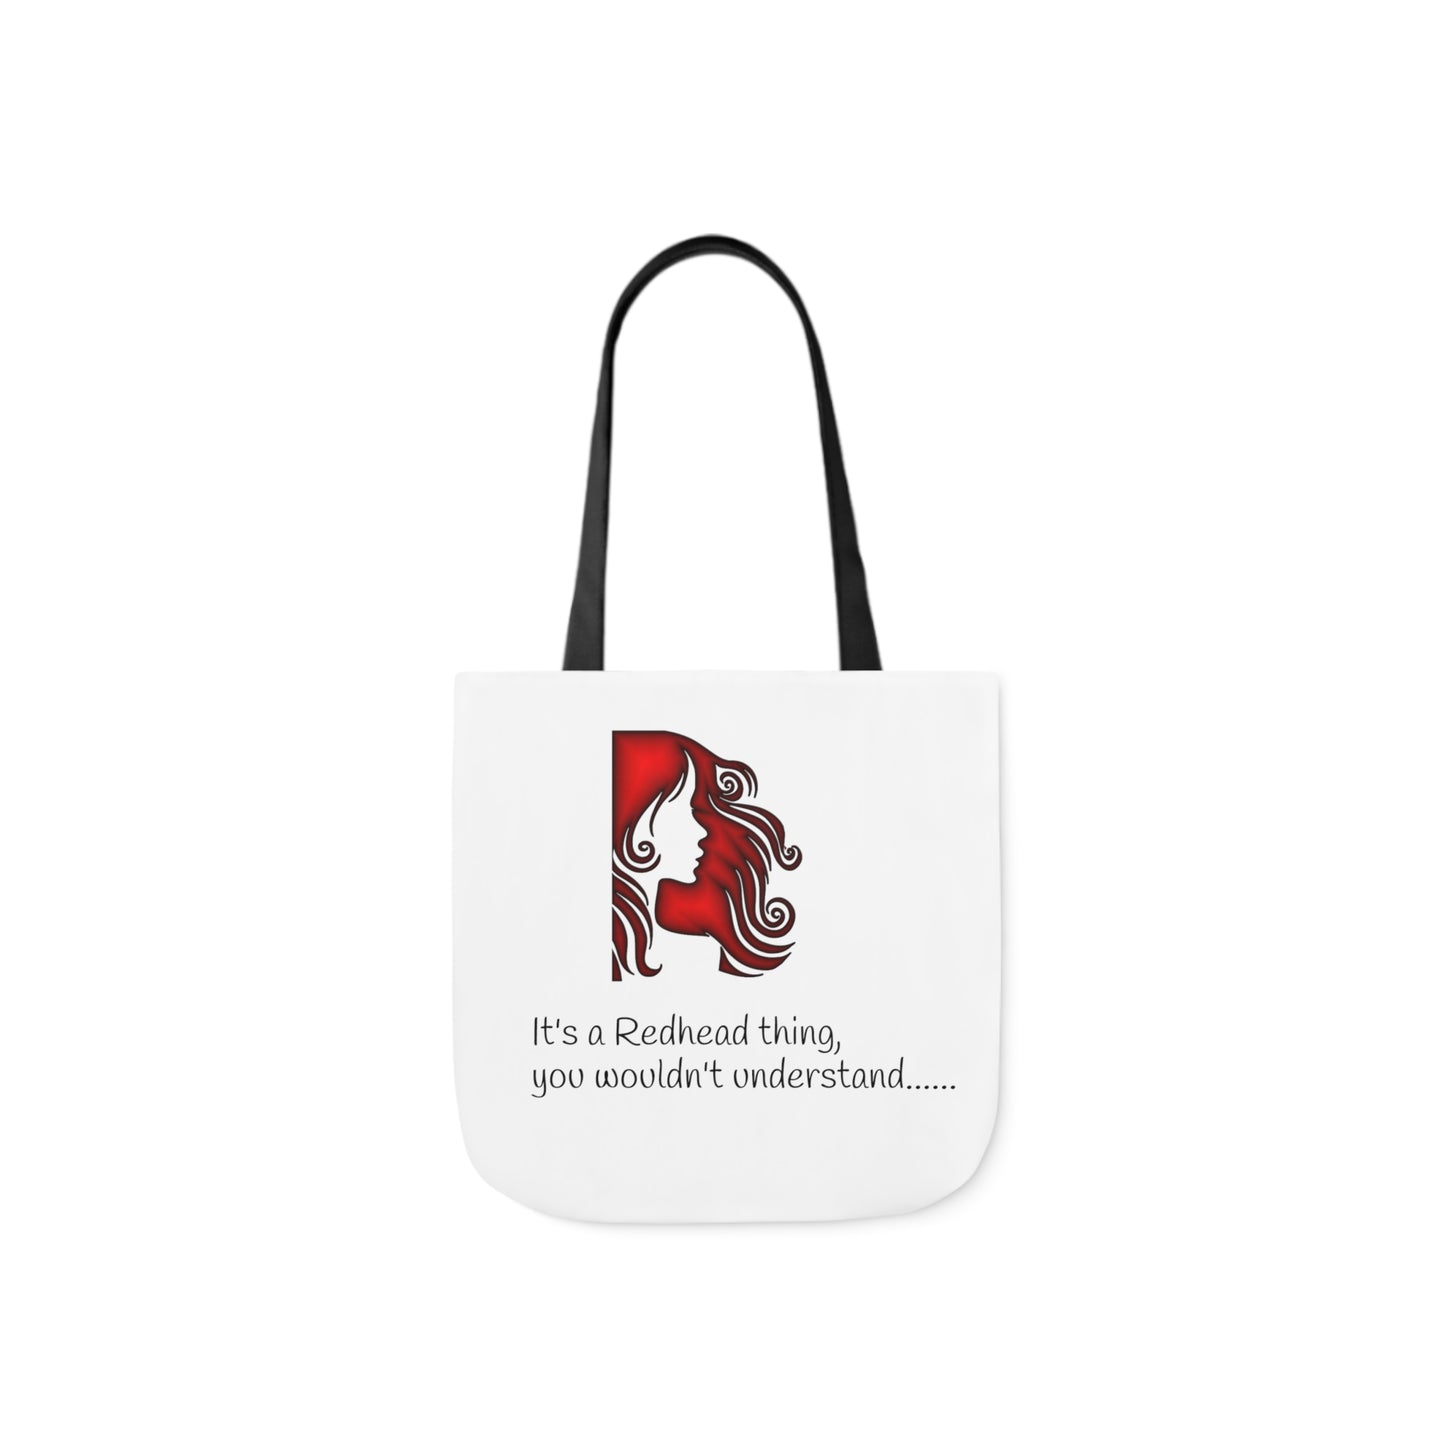 It's a Redhead thing, you wouldn't understand.... - Canvas Tote Bag